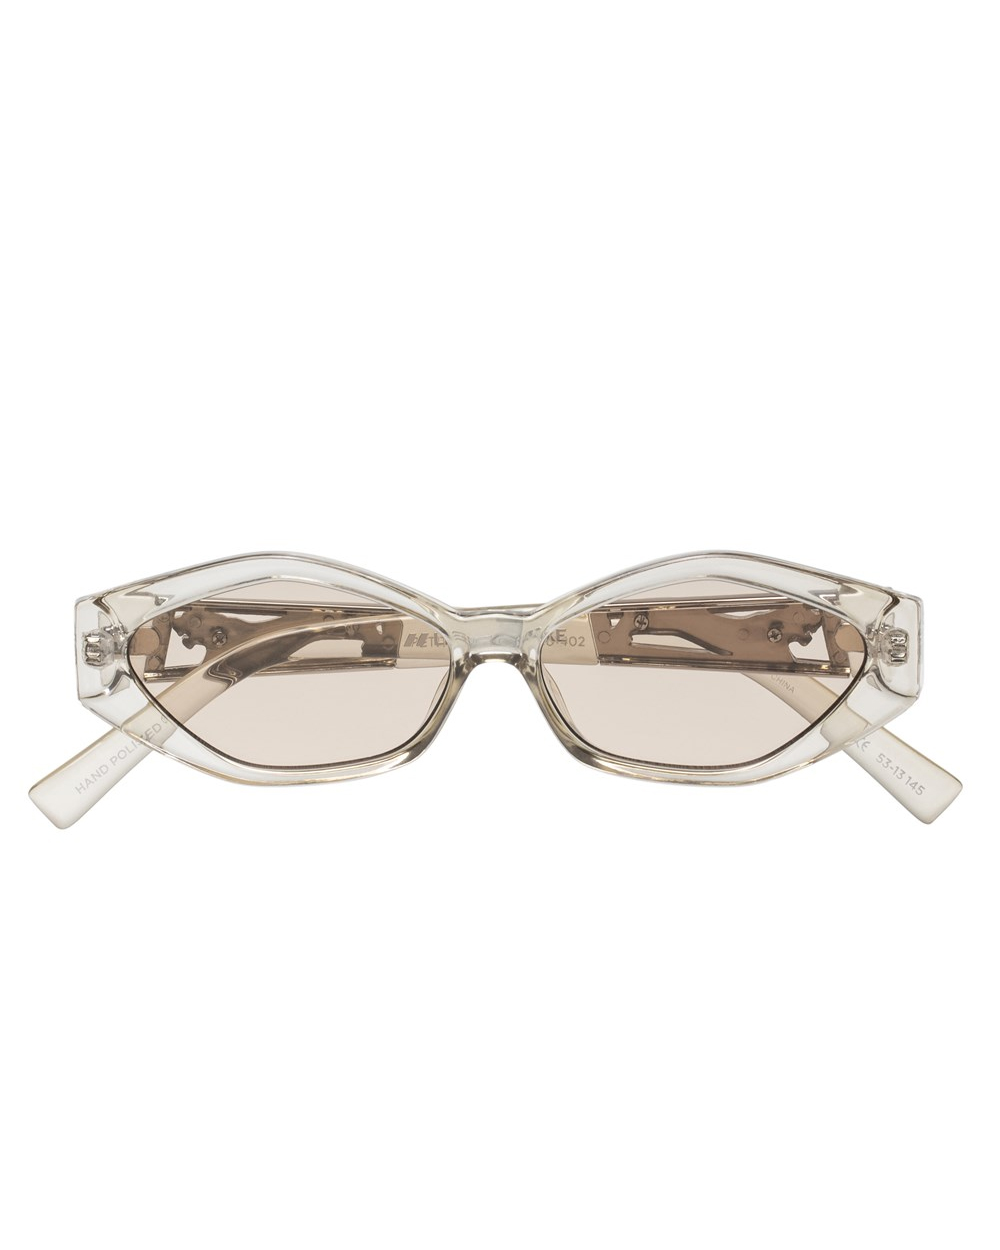 Petit Panthere sunglasses, $139 from Le Specs